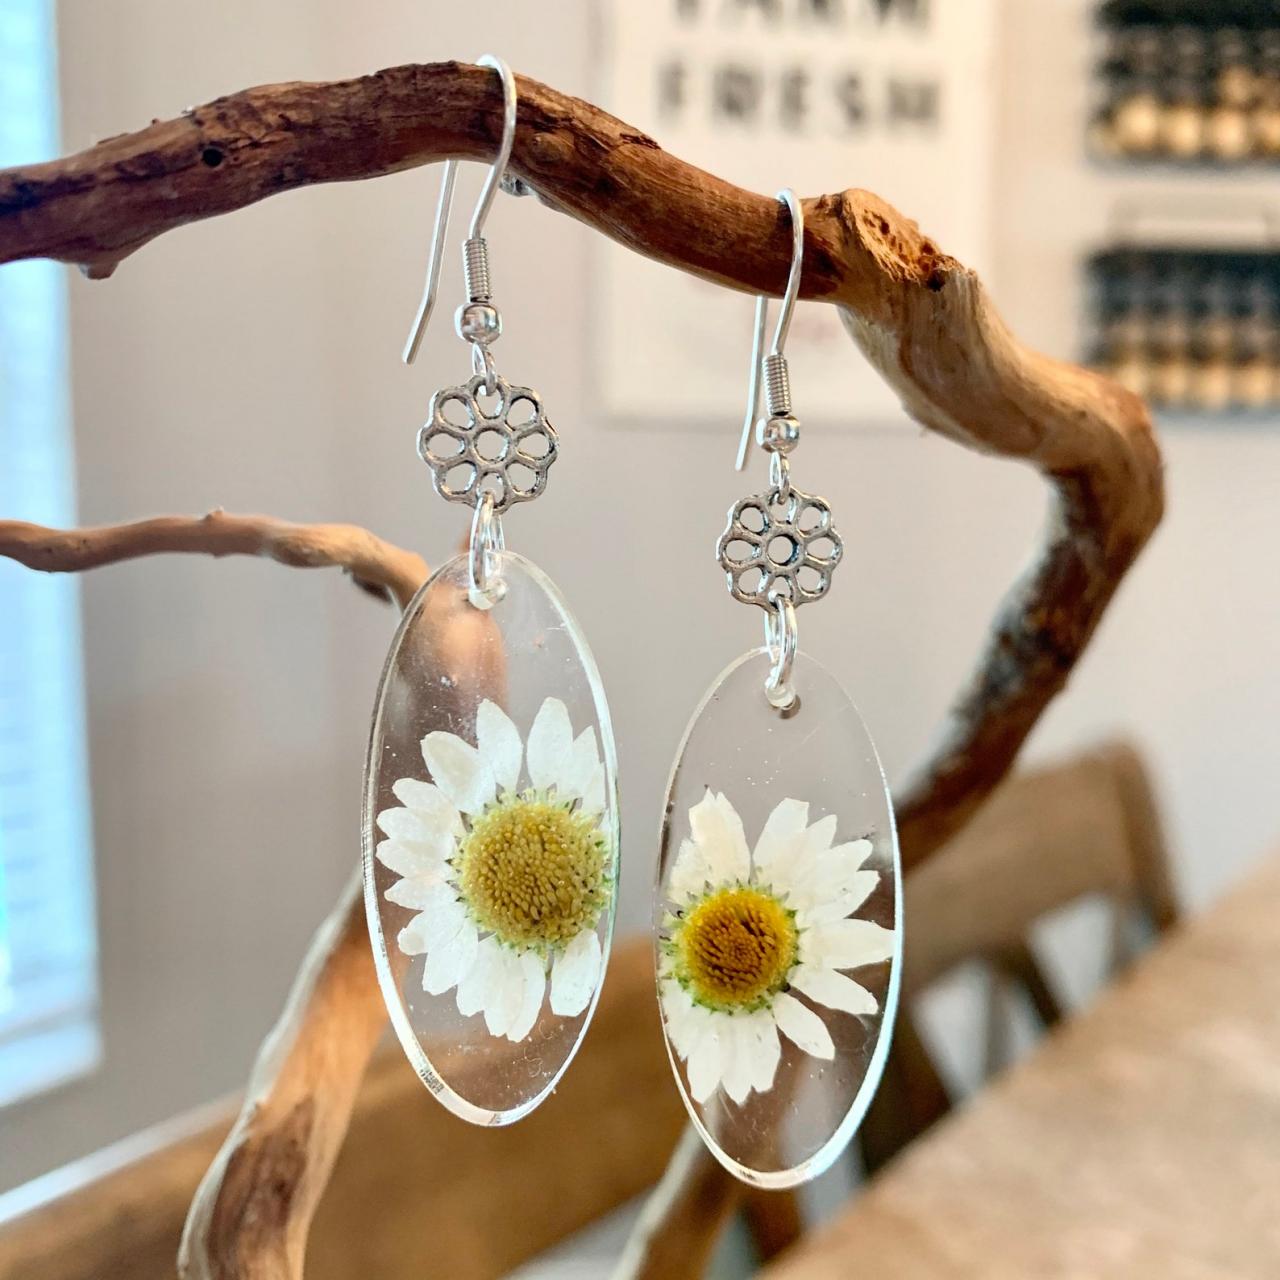 Real Dried Flower Earrings, Resin Pressed Daisy Oval Earrings,resin Jewelry,minimalist,jewelry For Women, Nature,graduation Gift,summer